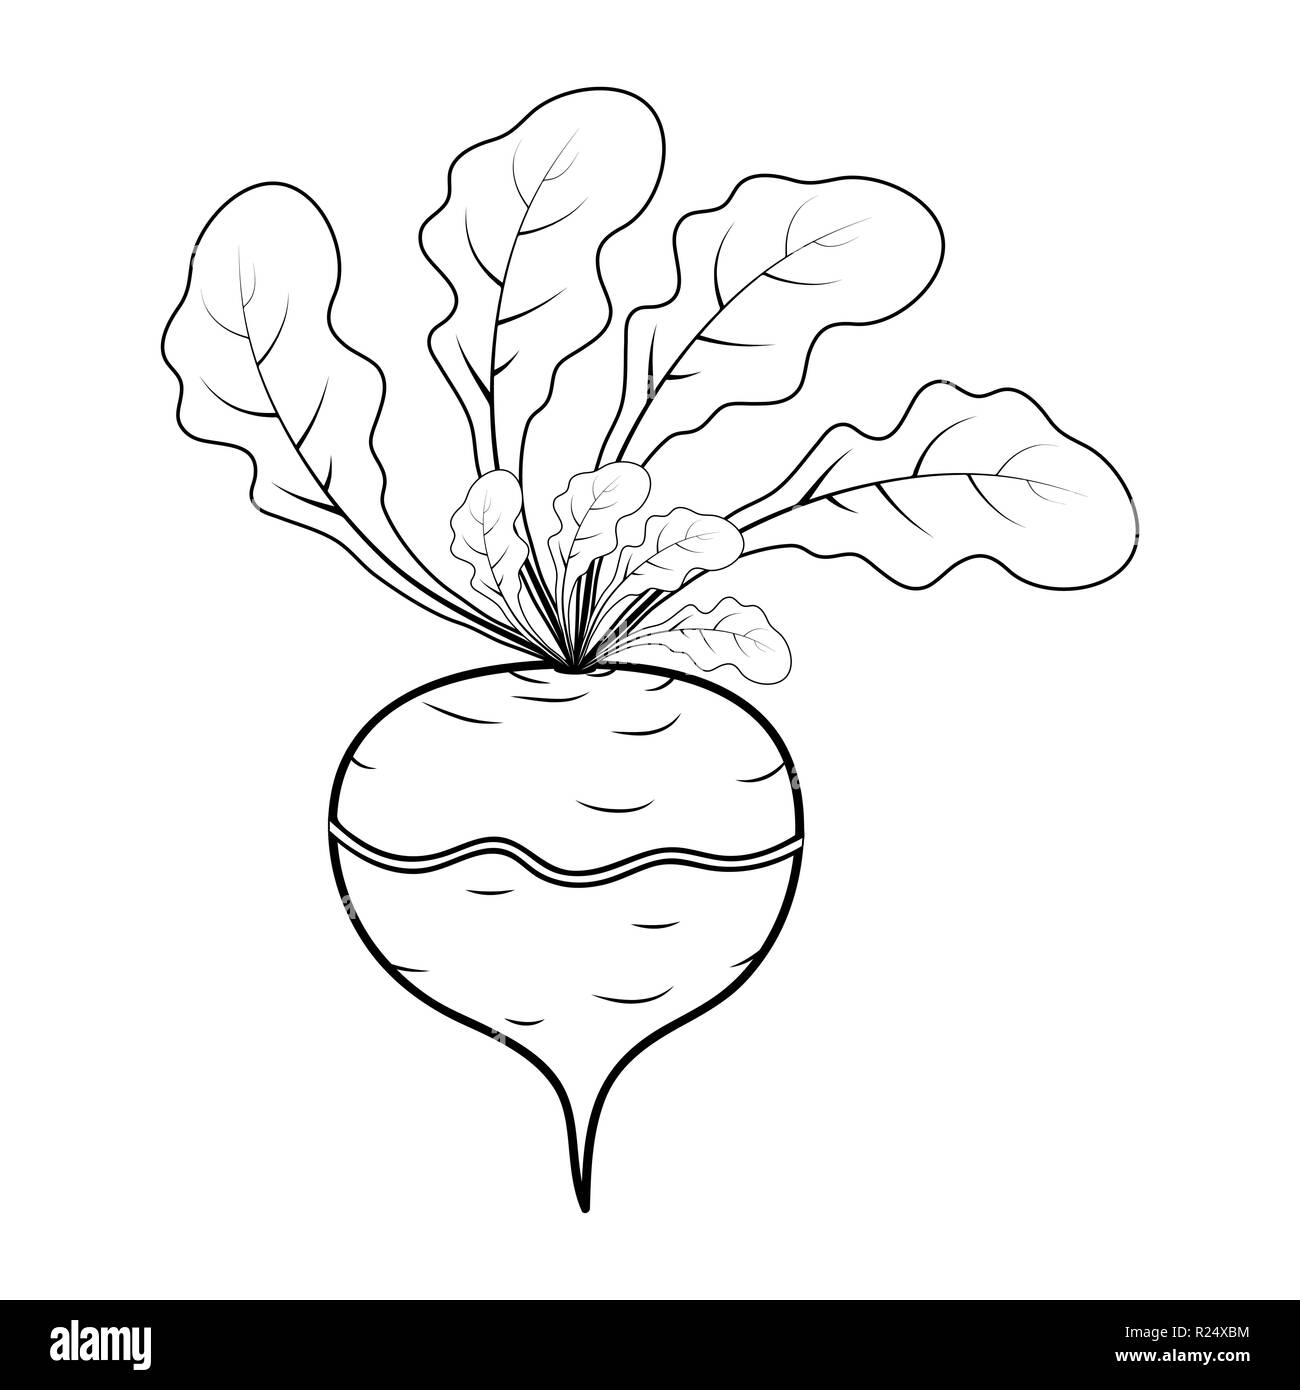 Drawing Sketch Turnip Vector Images over 250